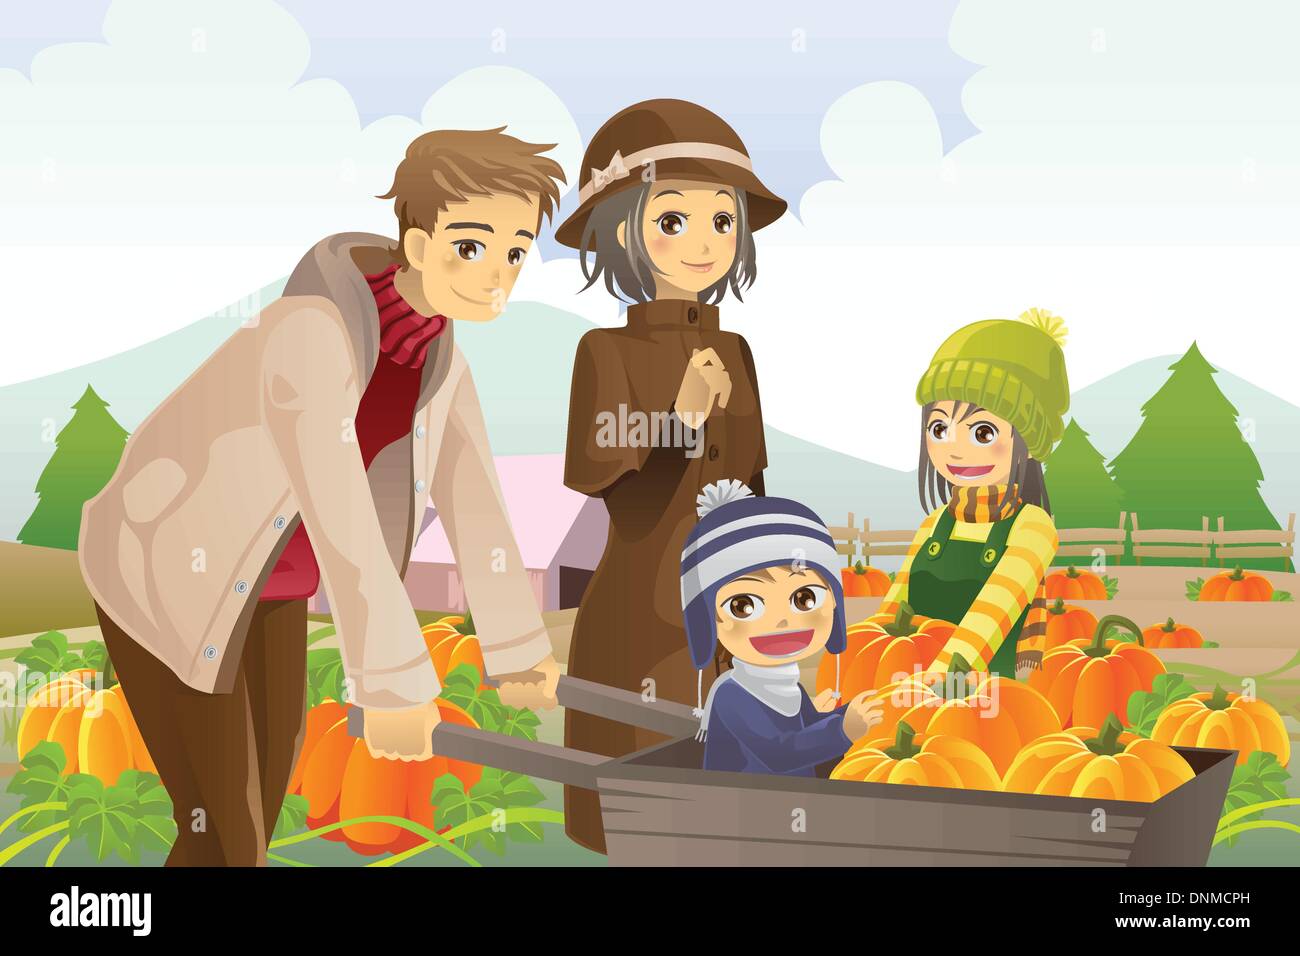 A vector illustration of a happy family on a pumpkin patch trip in autumn or fall season Stock Vector